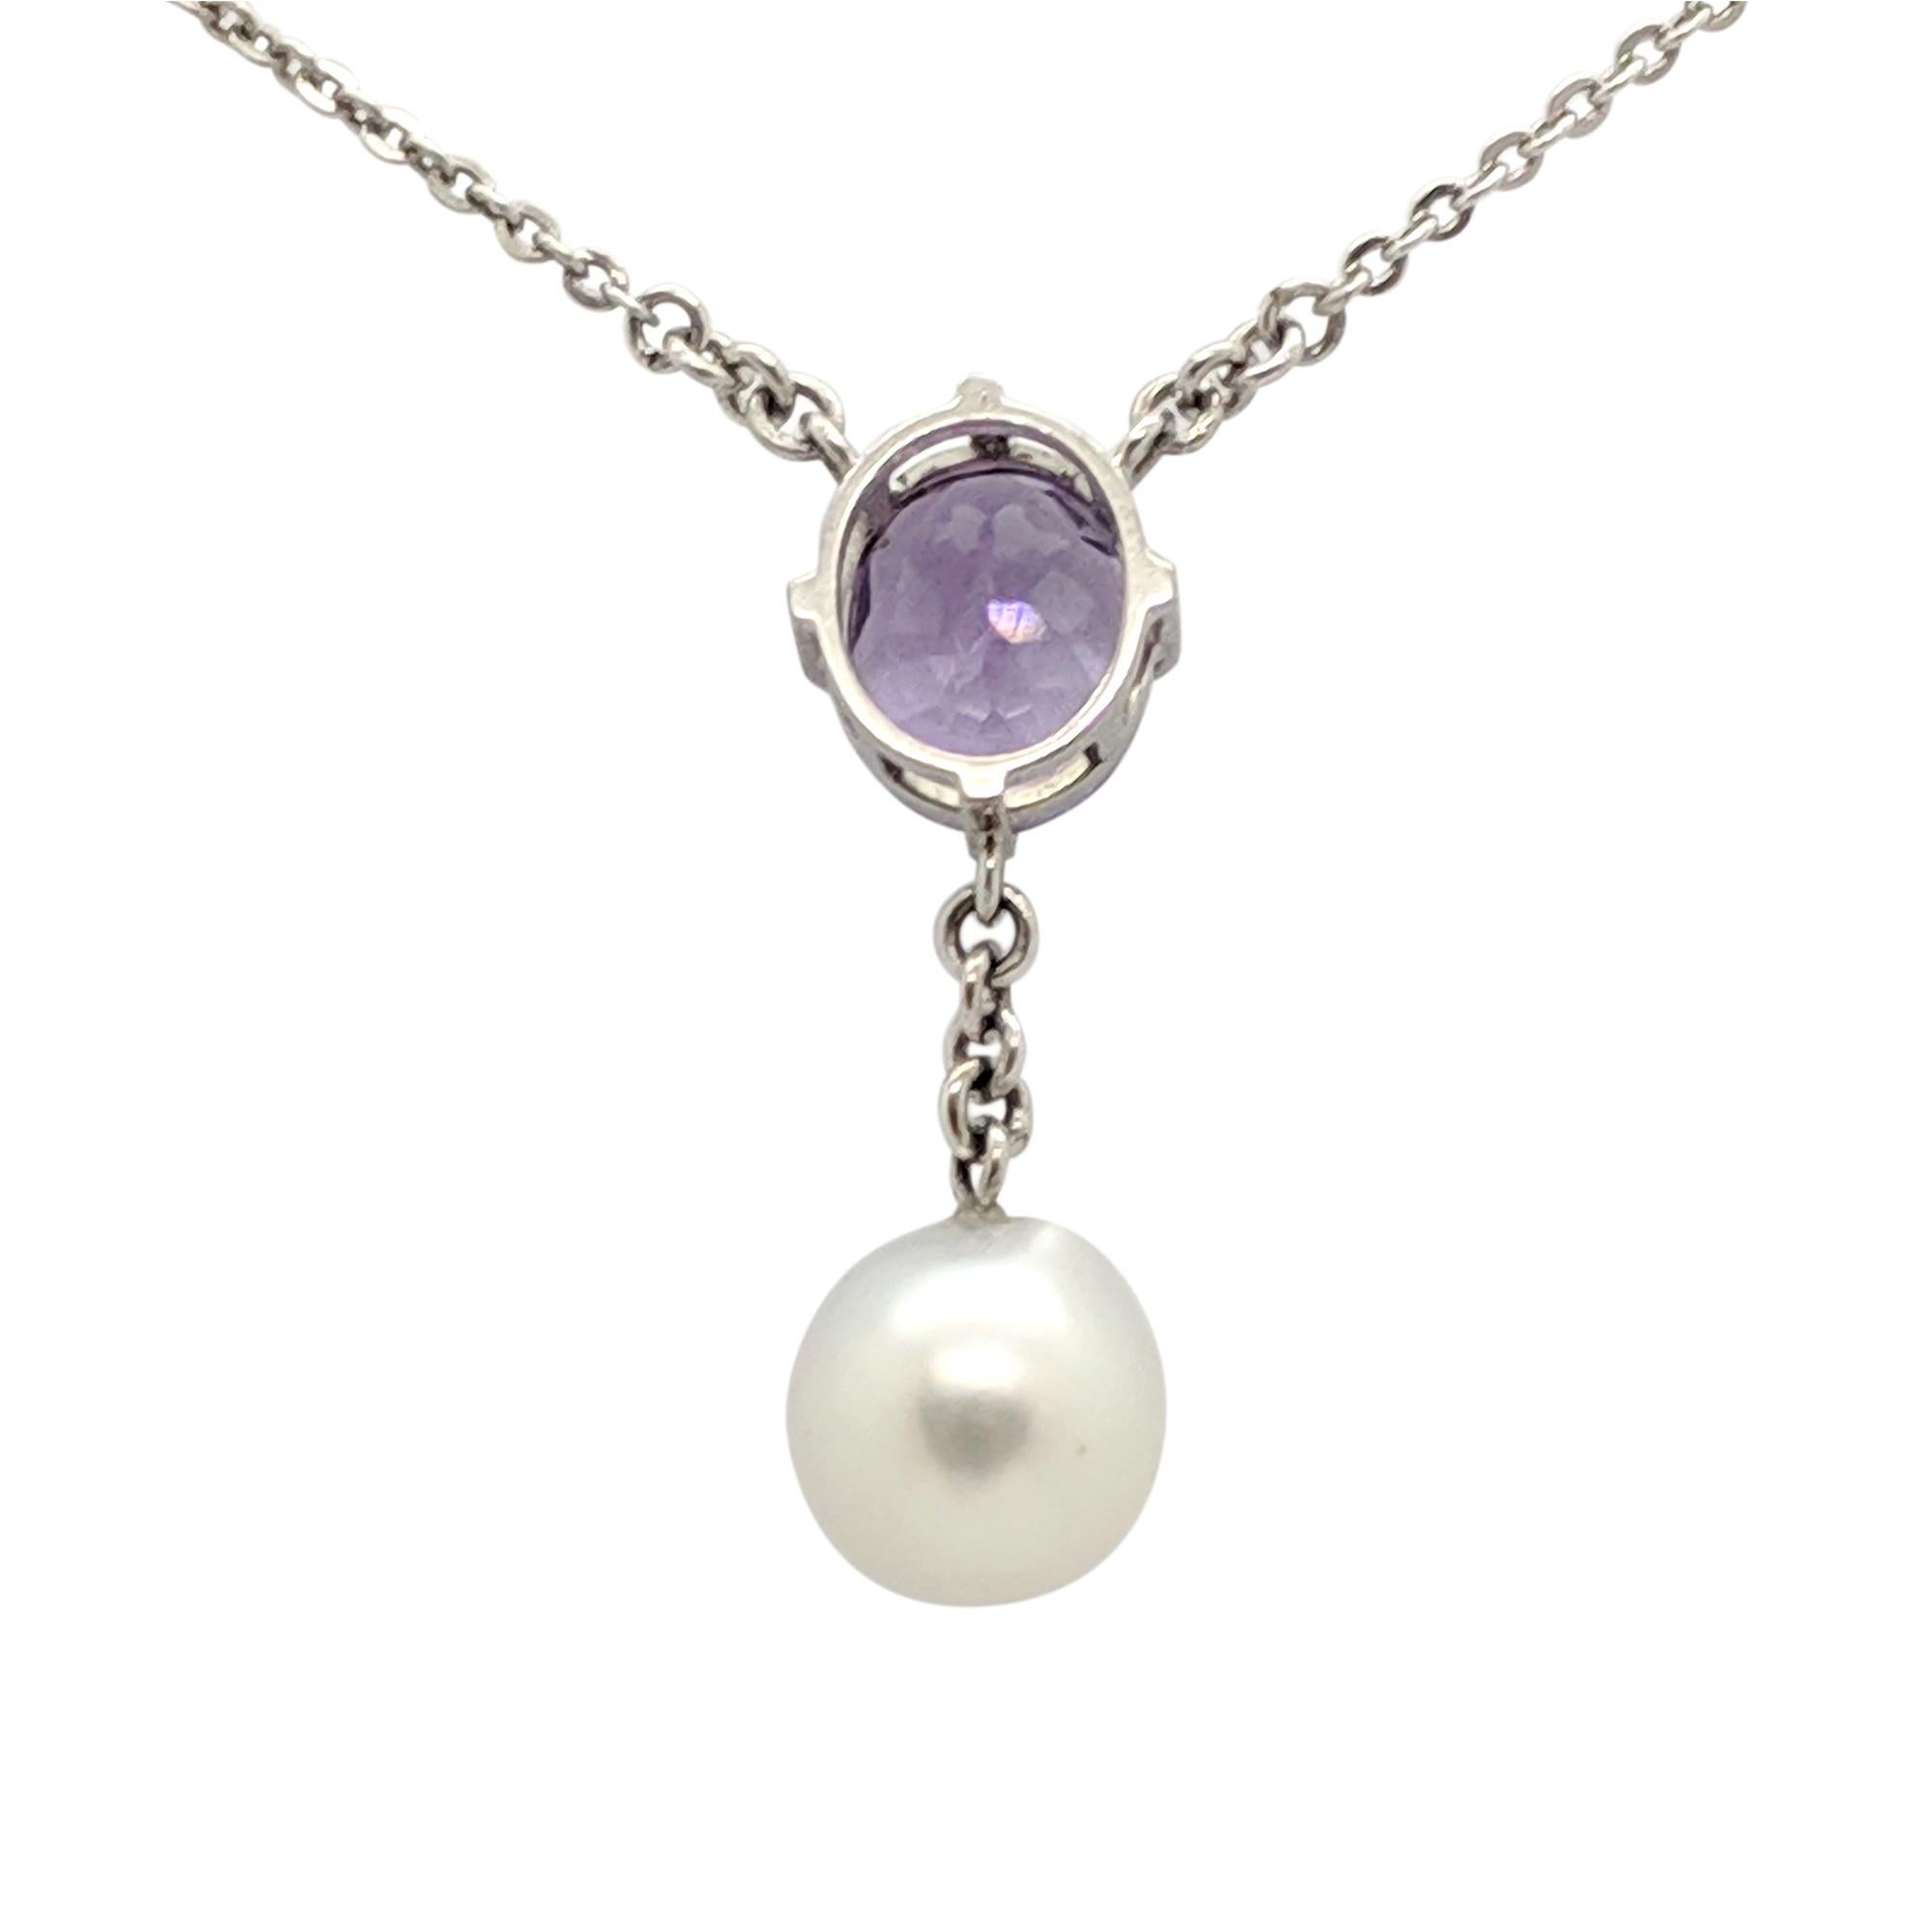 Women's  2.57 Carat Oval Cut Amethyst and South Sea Pearl Necklace 18 Carat White Gold For Sale